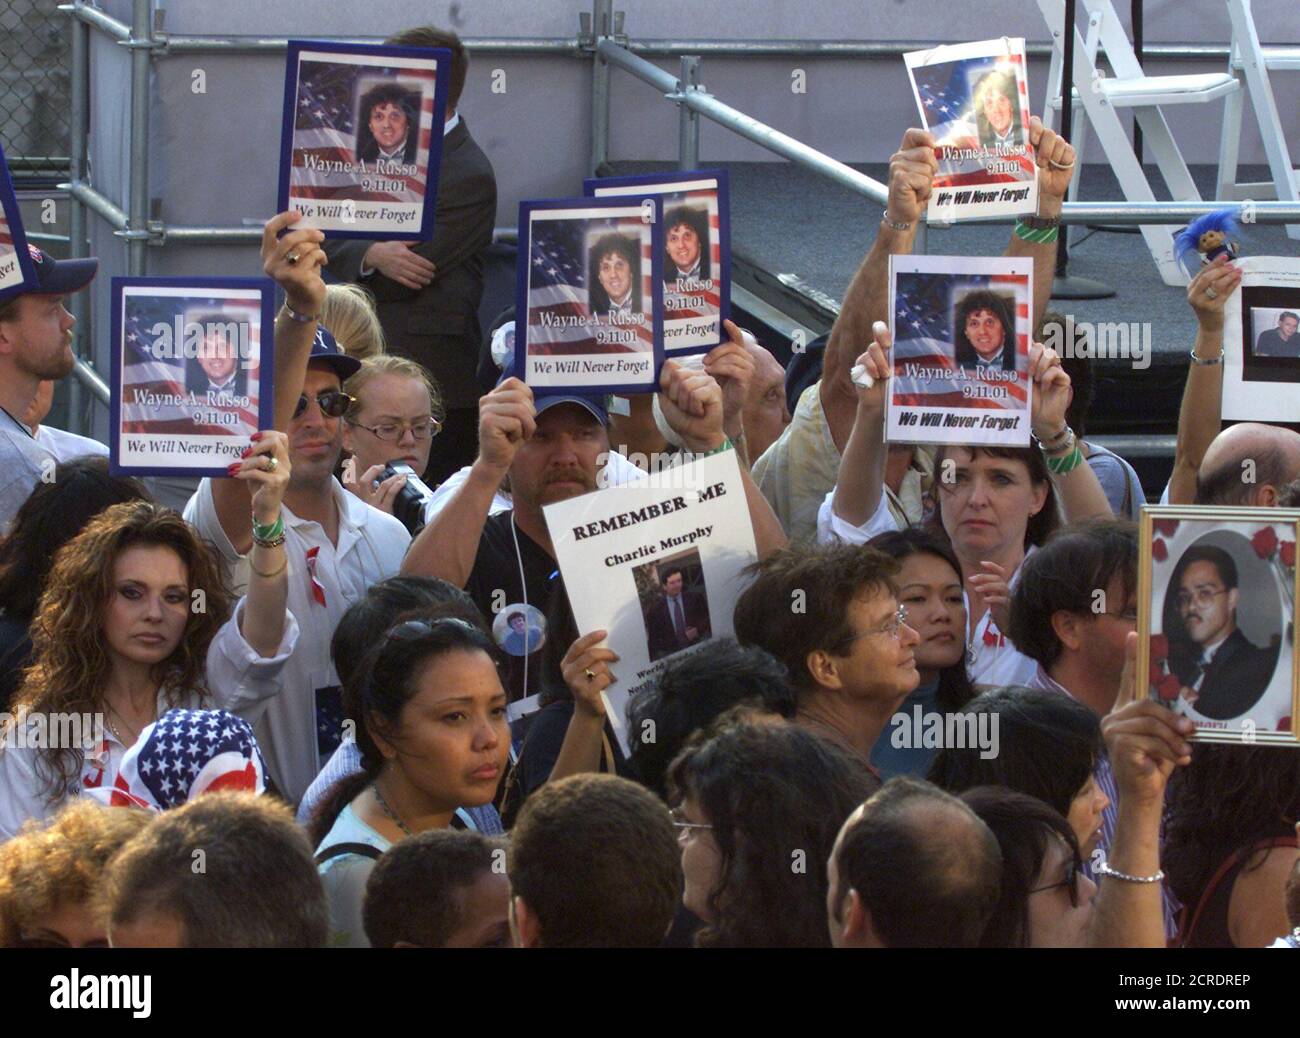 Family members hold pictures of their lost loved ones as they wait to attend an anniversary ceremony in New York, September 11, 2002. First anniversary ceremonies to mark the attack on the World Trade Center are being held across the nation. REUTERS/Jim Bourg  PJ/ME Stock Photo